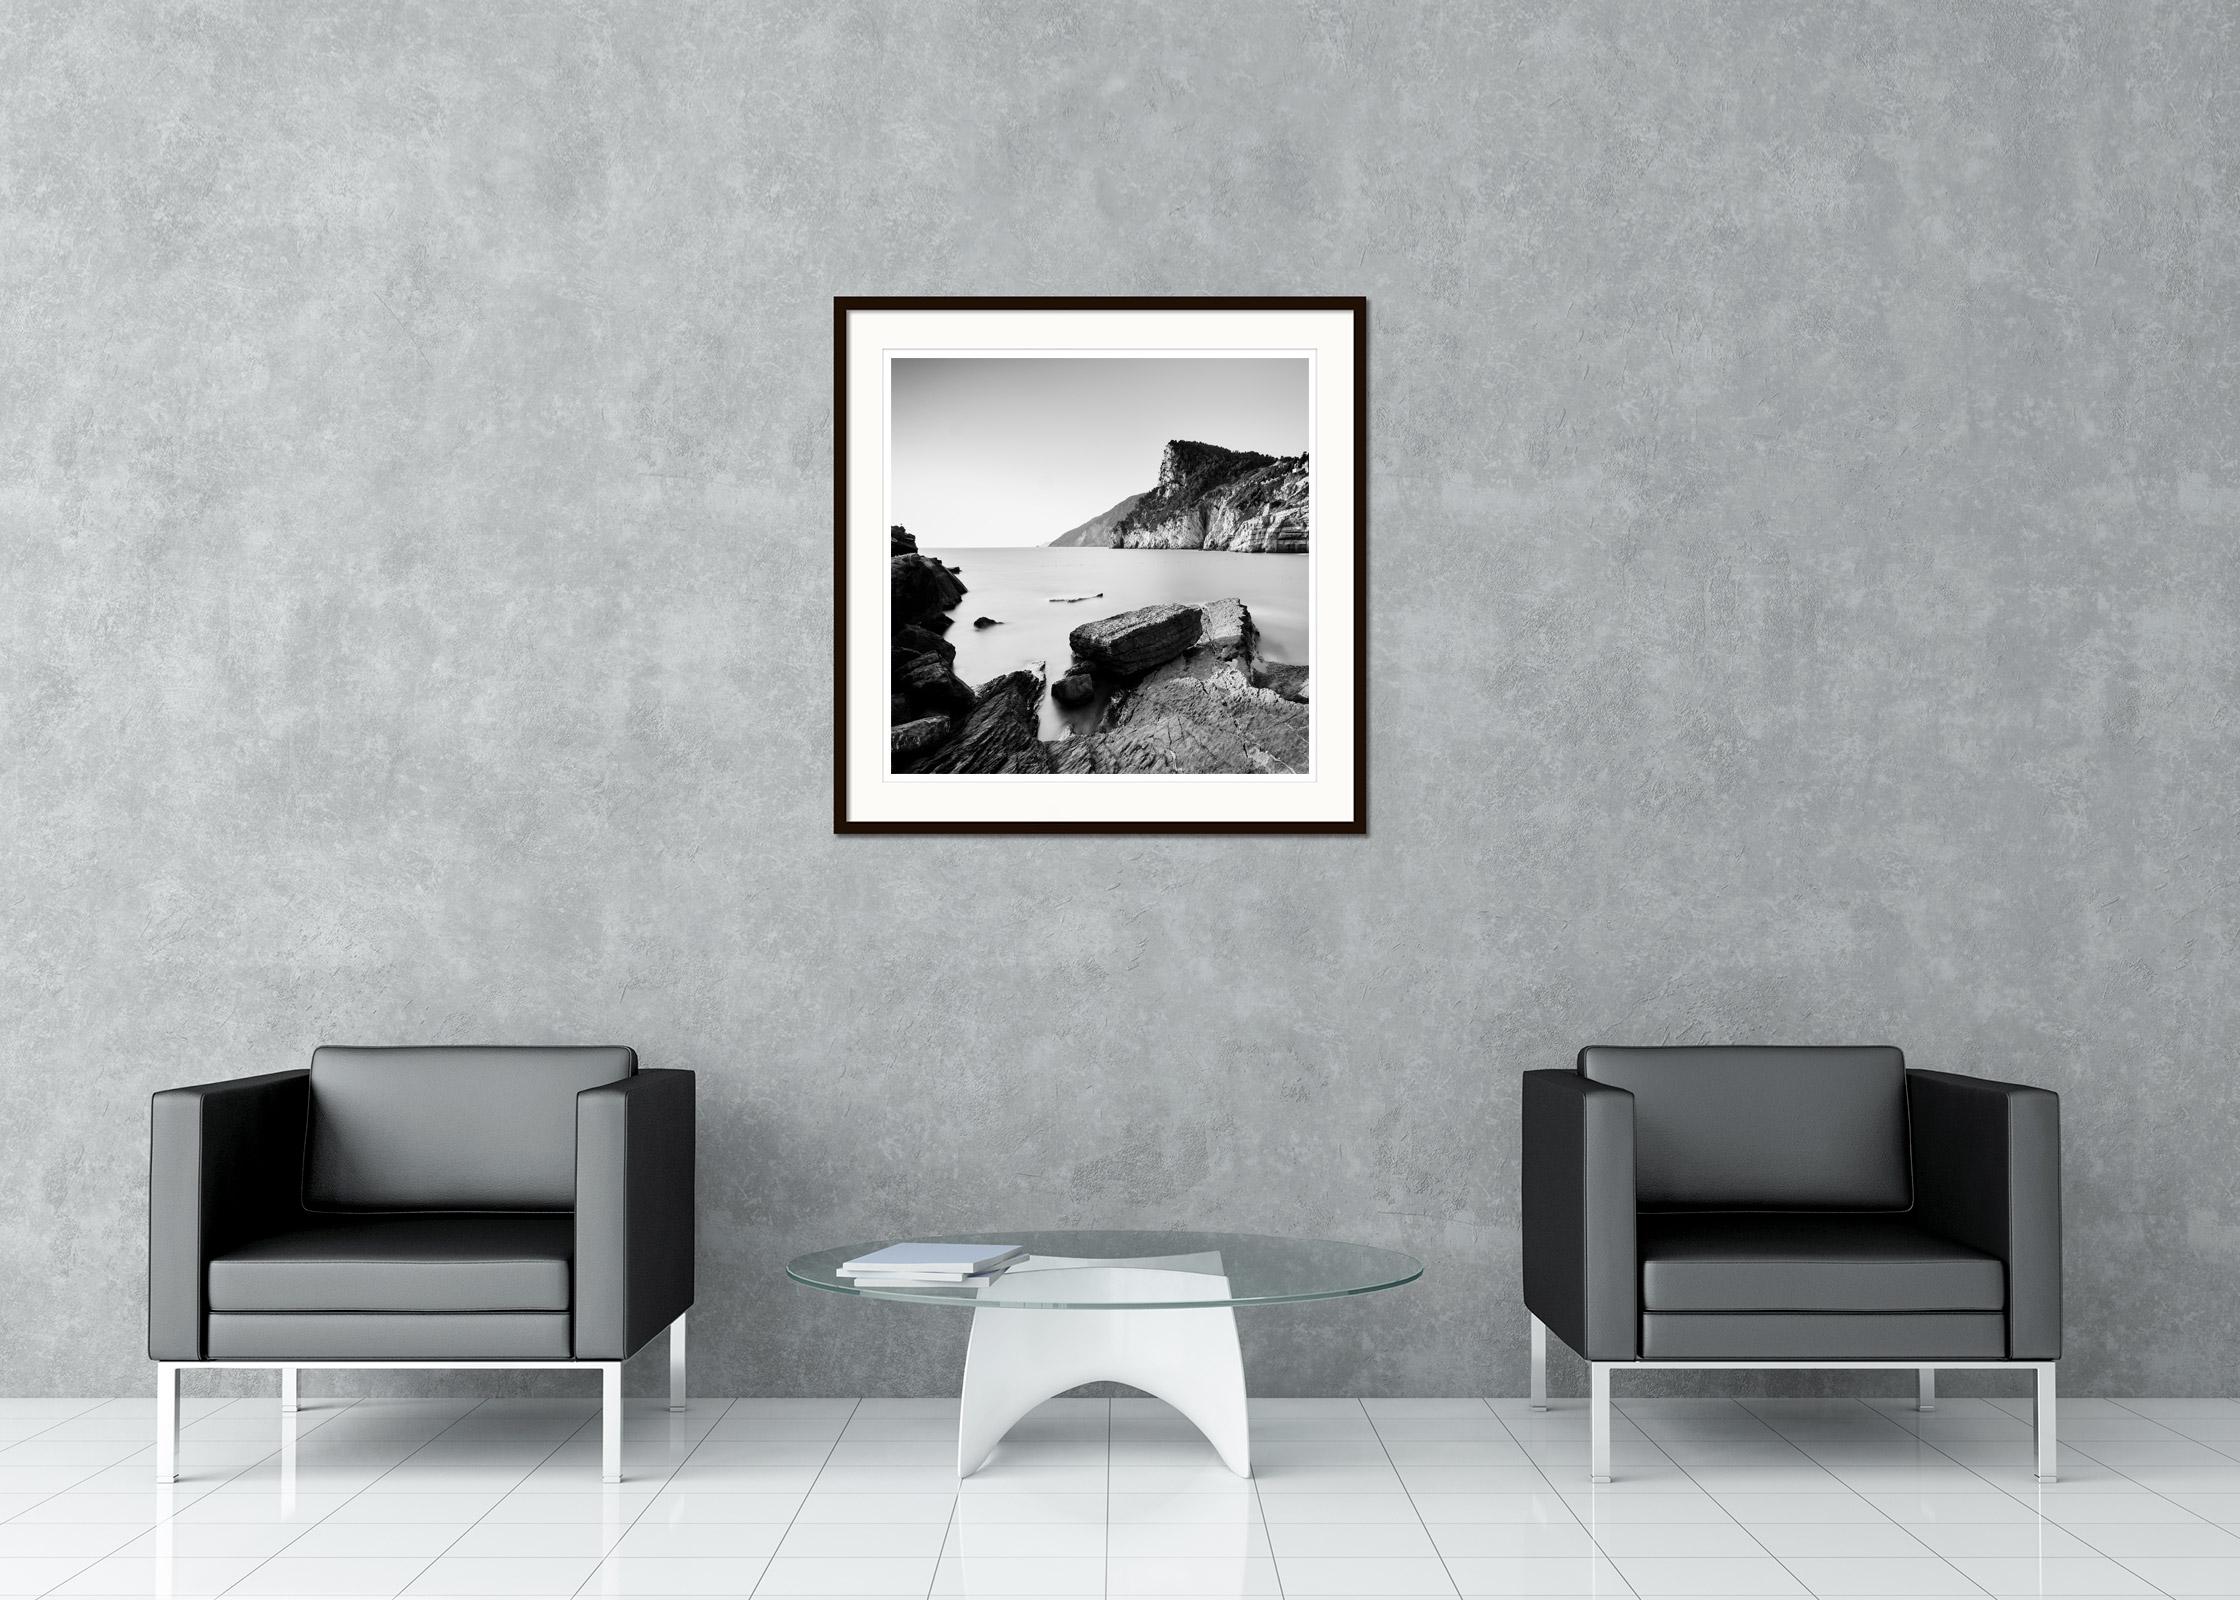 Black and white fine art long exposure waterscape - landscape photography. Rocky Coast of Porto Venere, Cinque Terre, Italy. Archival pigment ink print as part of a limited edition of 9. All Gerald Berghammer prints are made to order in limited